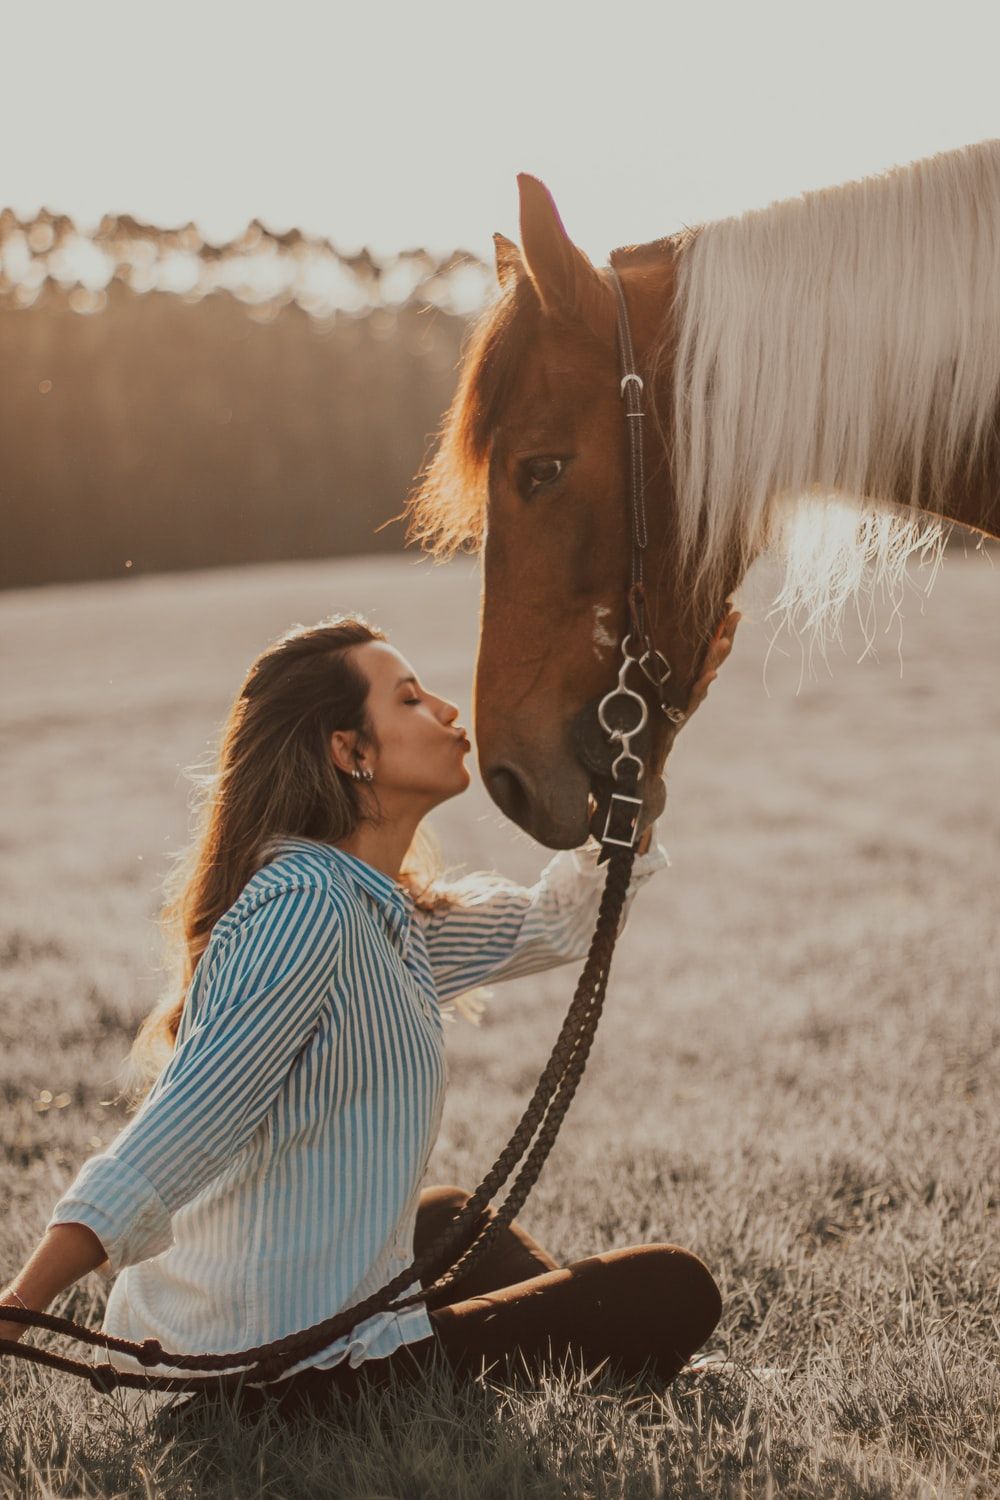 Girl Horse Picture. Download Free Image